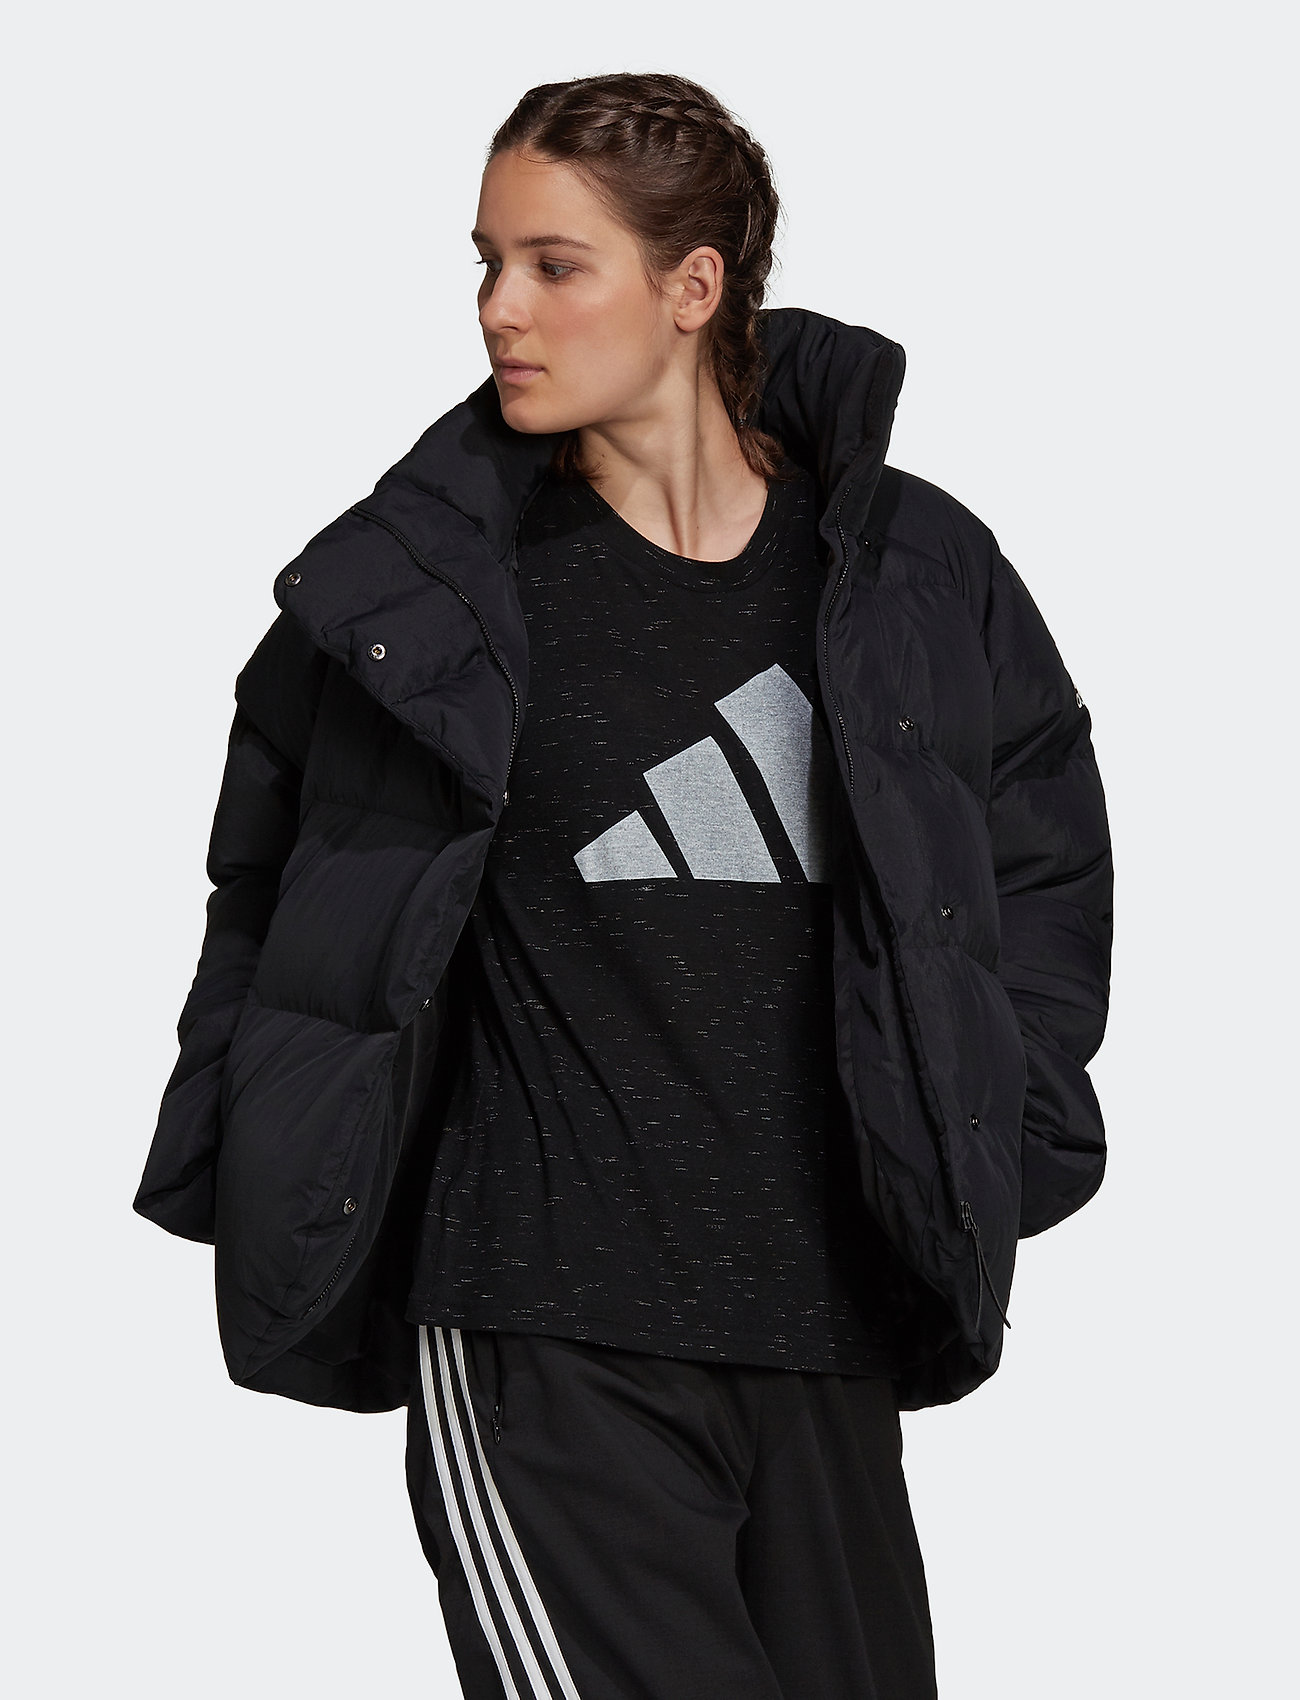 adidas Sportswear Boozt.com. Jacket W 230 Fast €. online Baffle at - jackets Sportswear Big Down- padded delivery Down Buy & easy returns adidas from and